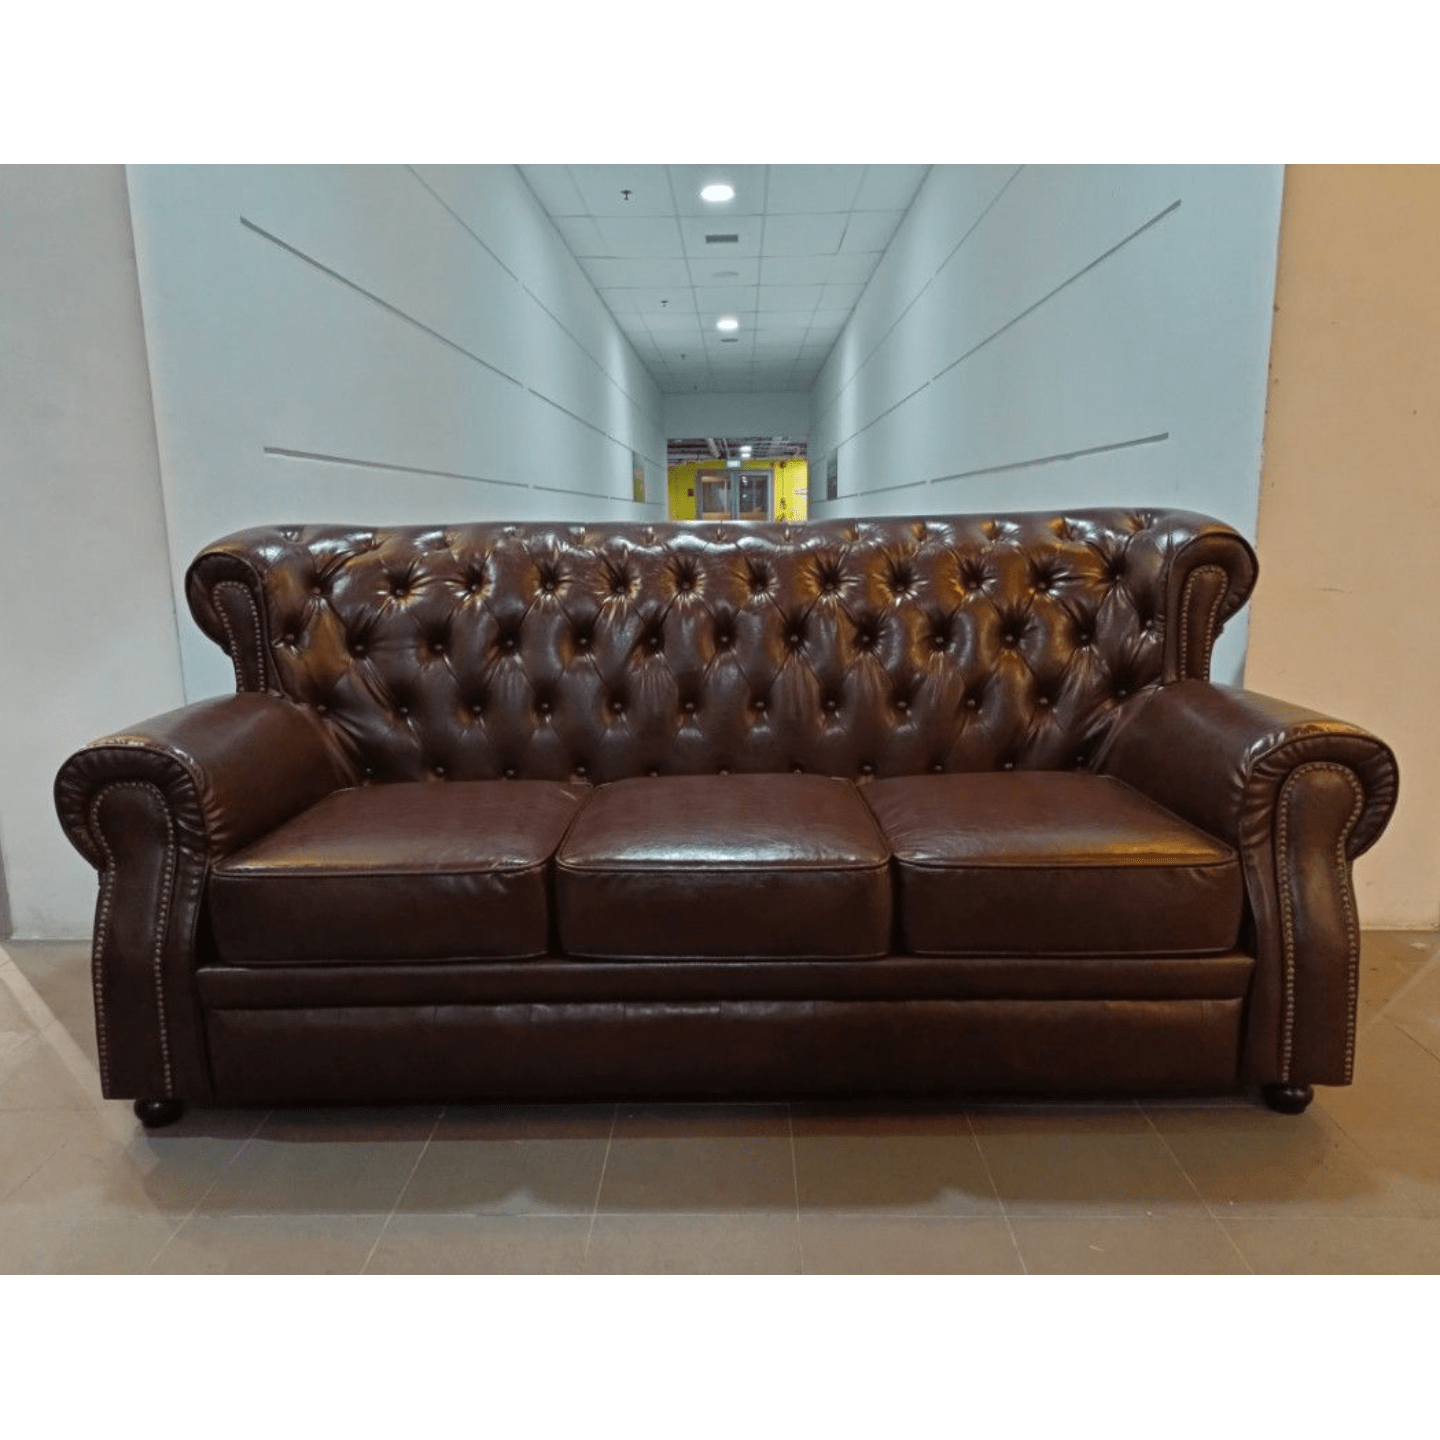 CLIVEREN 3 Seater Chesterfield High Back Sofa in WINE RED PU